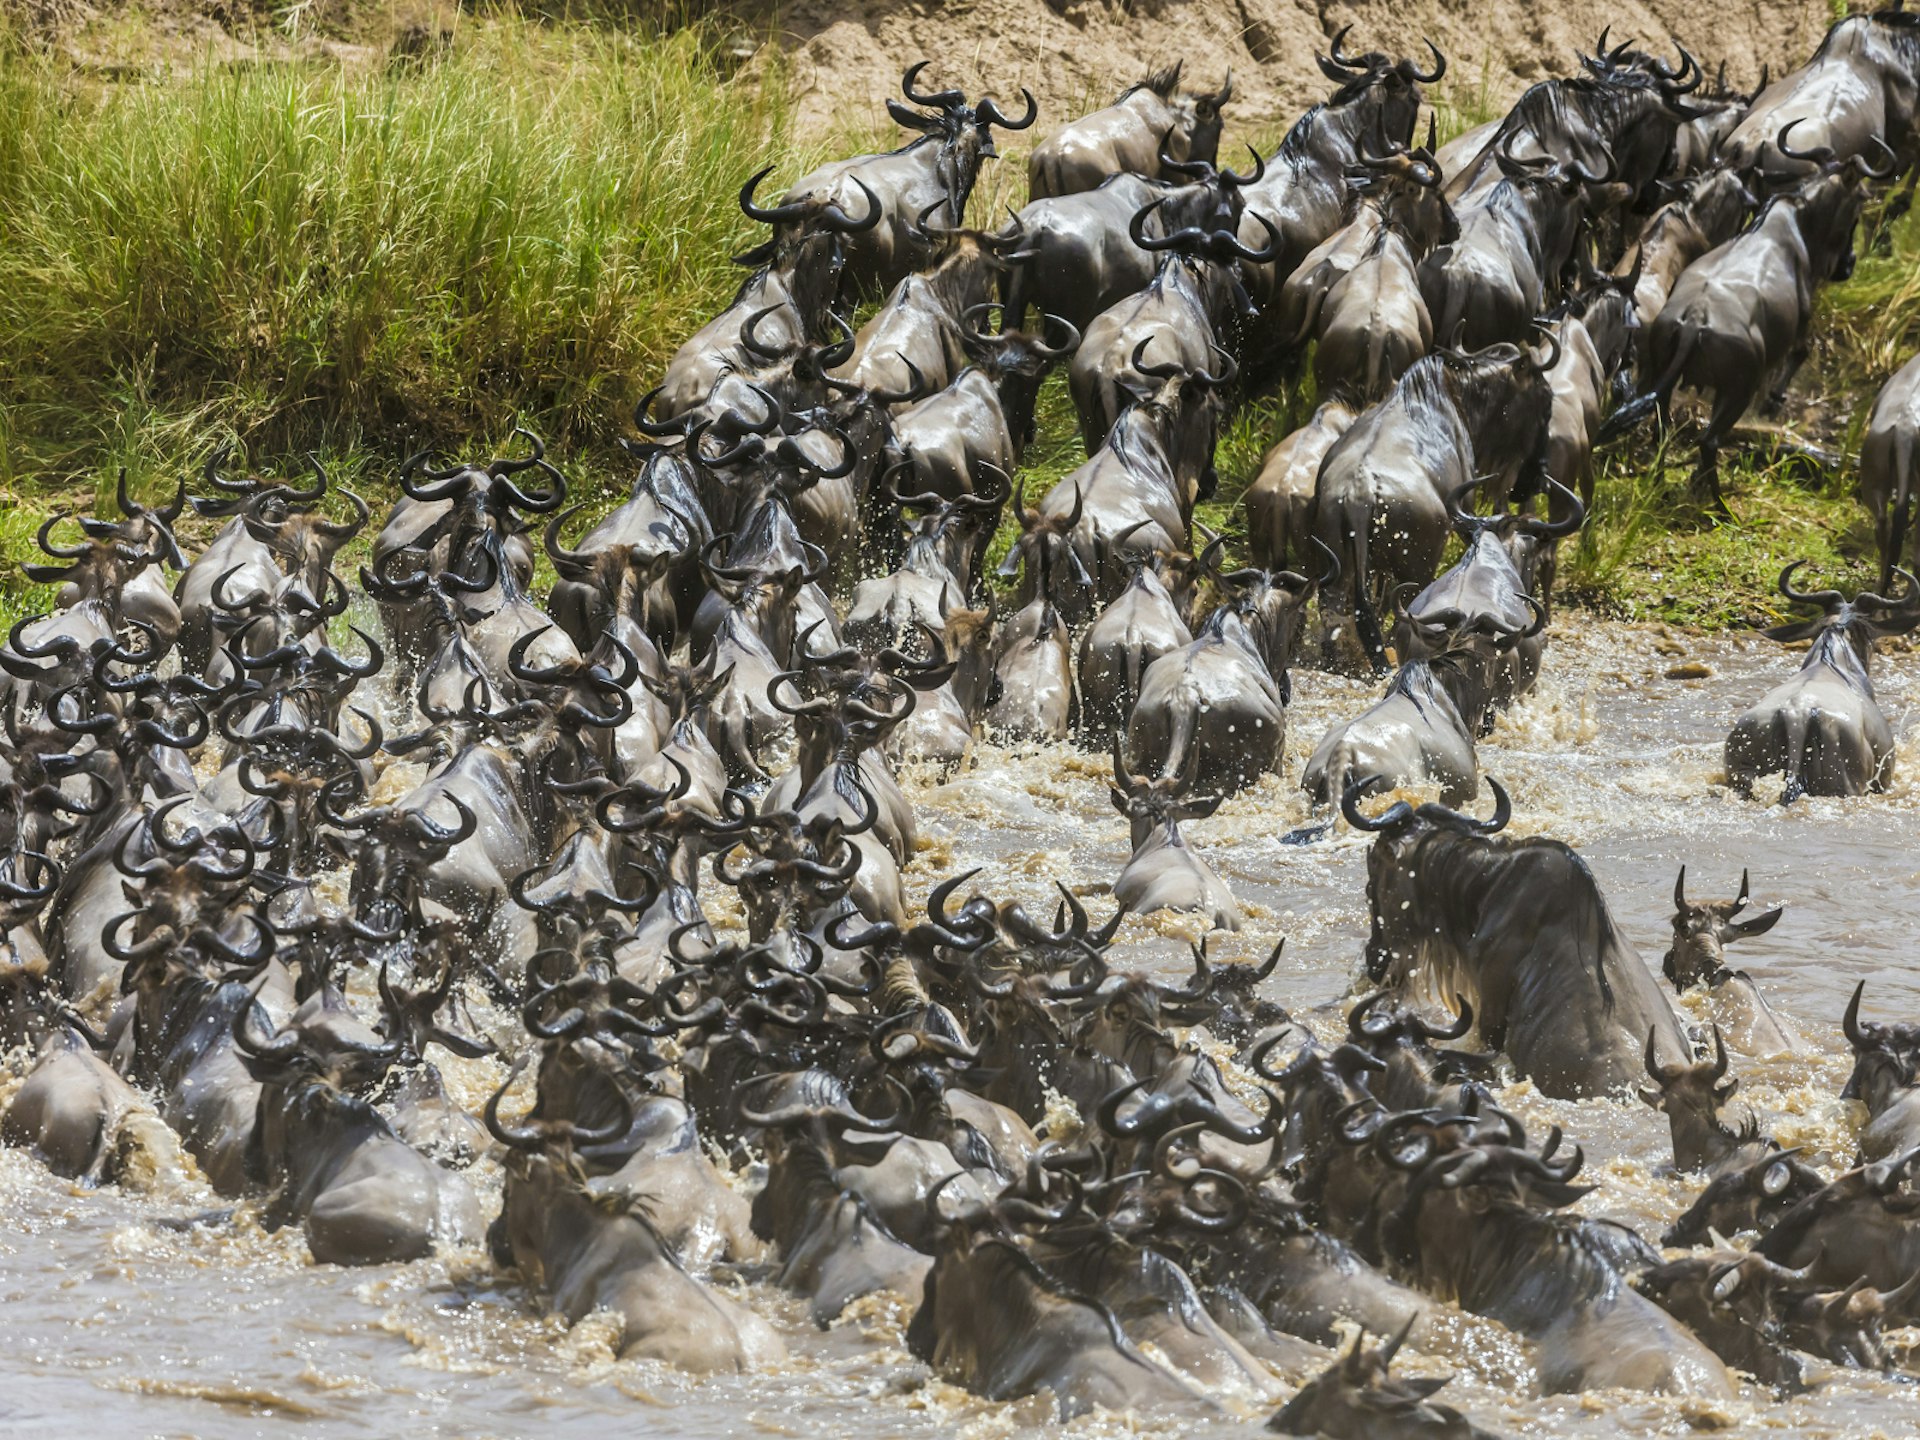 Approximately 50 wildebeest plough through the Mara, churning the brown river water, during the migration in Kenya